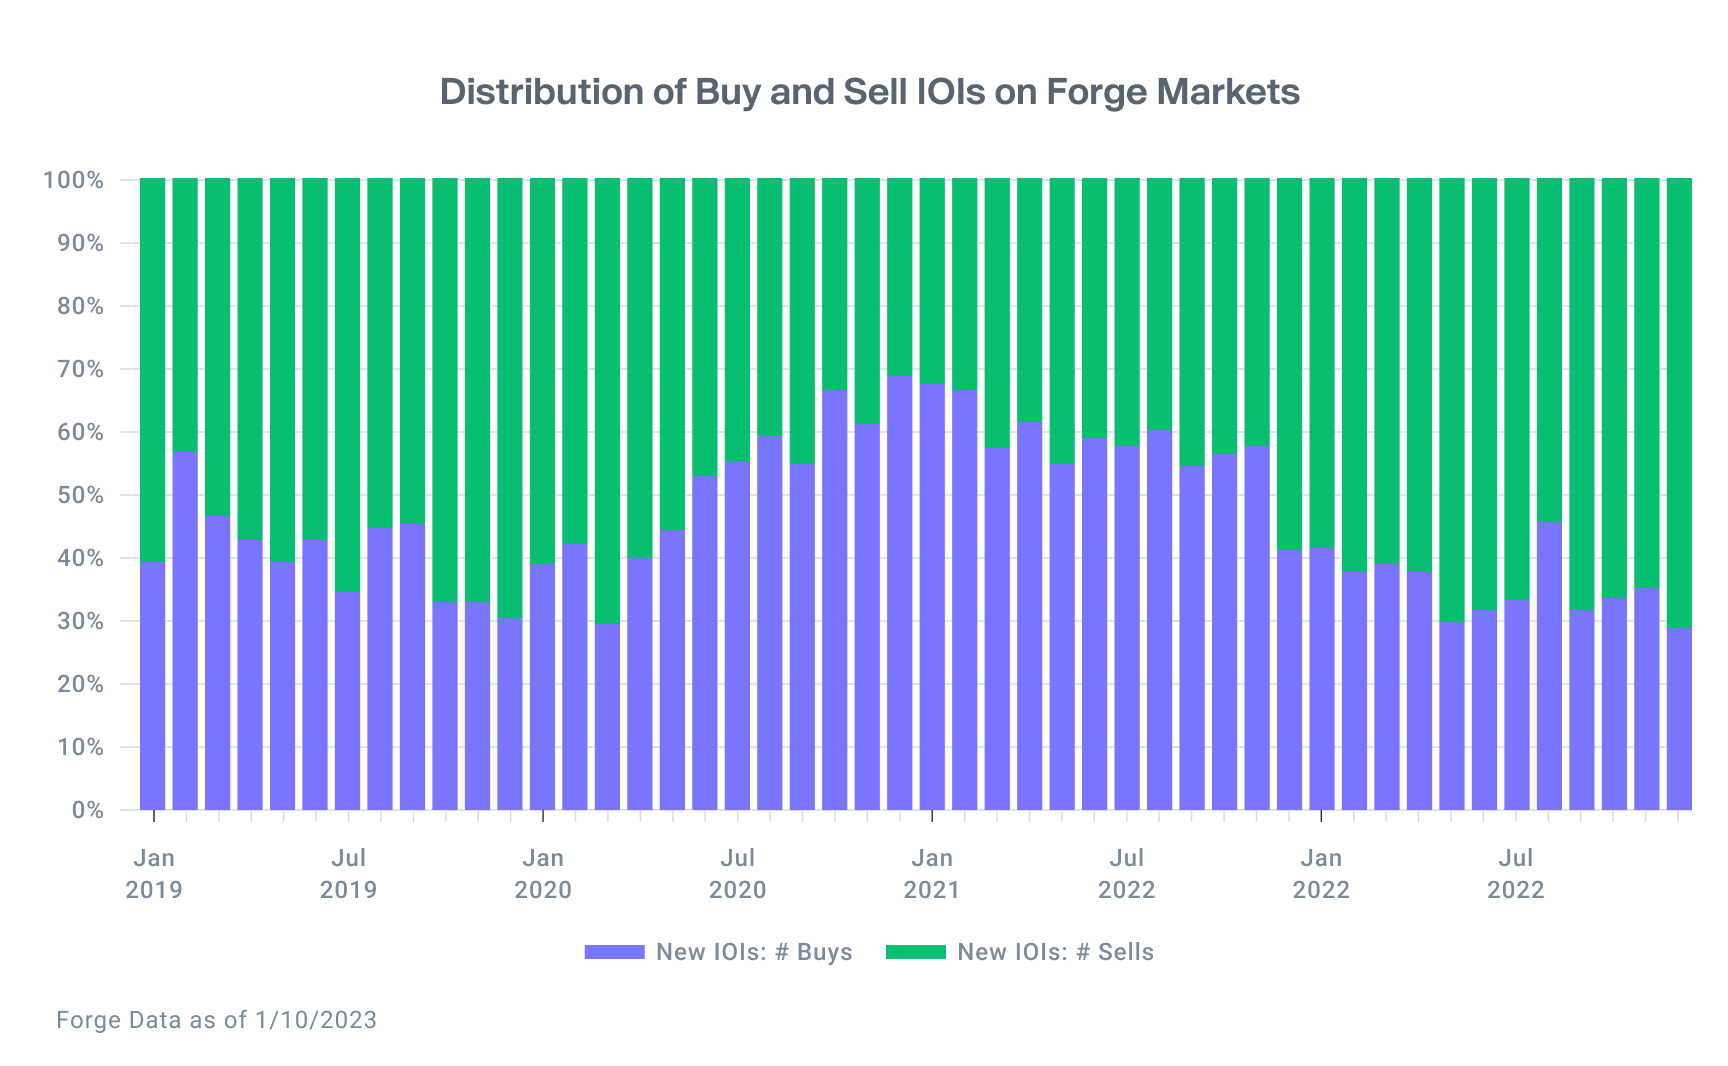 Chart shows distribution of Sell and Buy IOI on Forge Markets